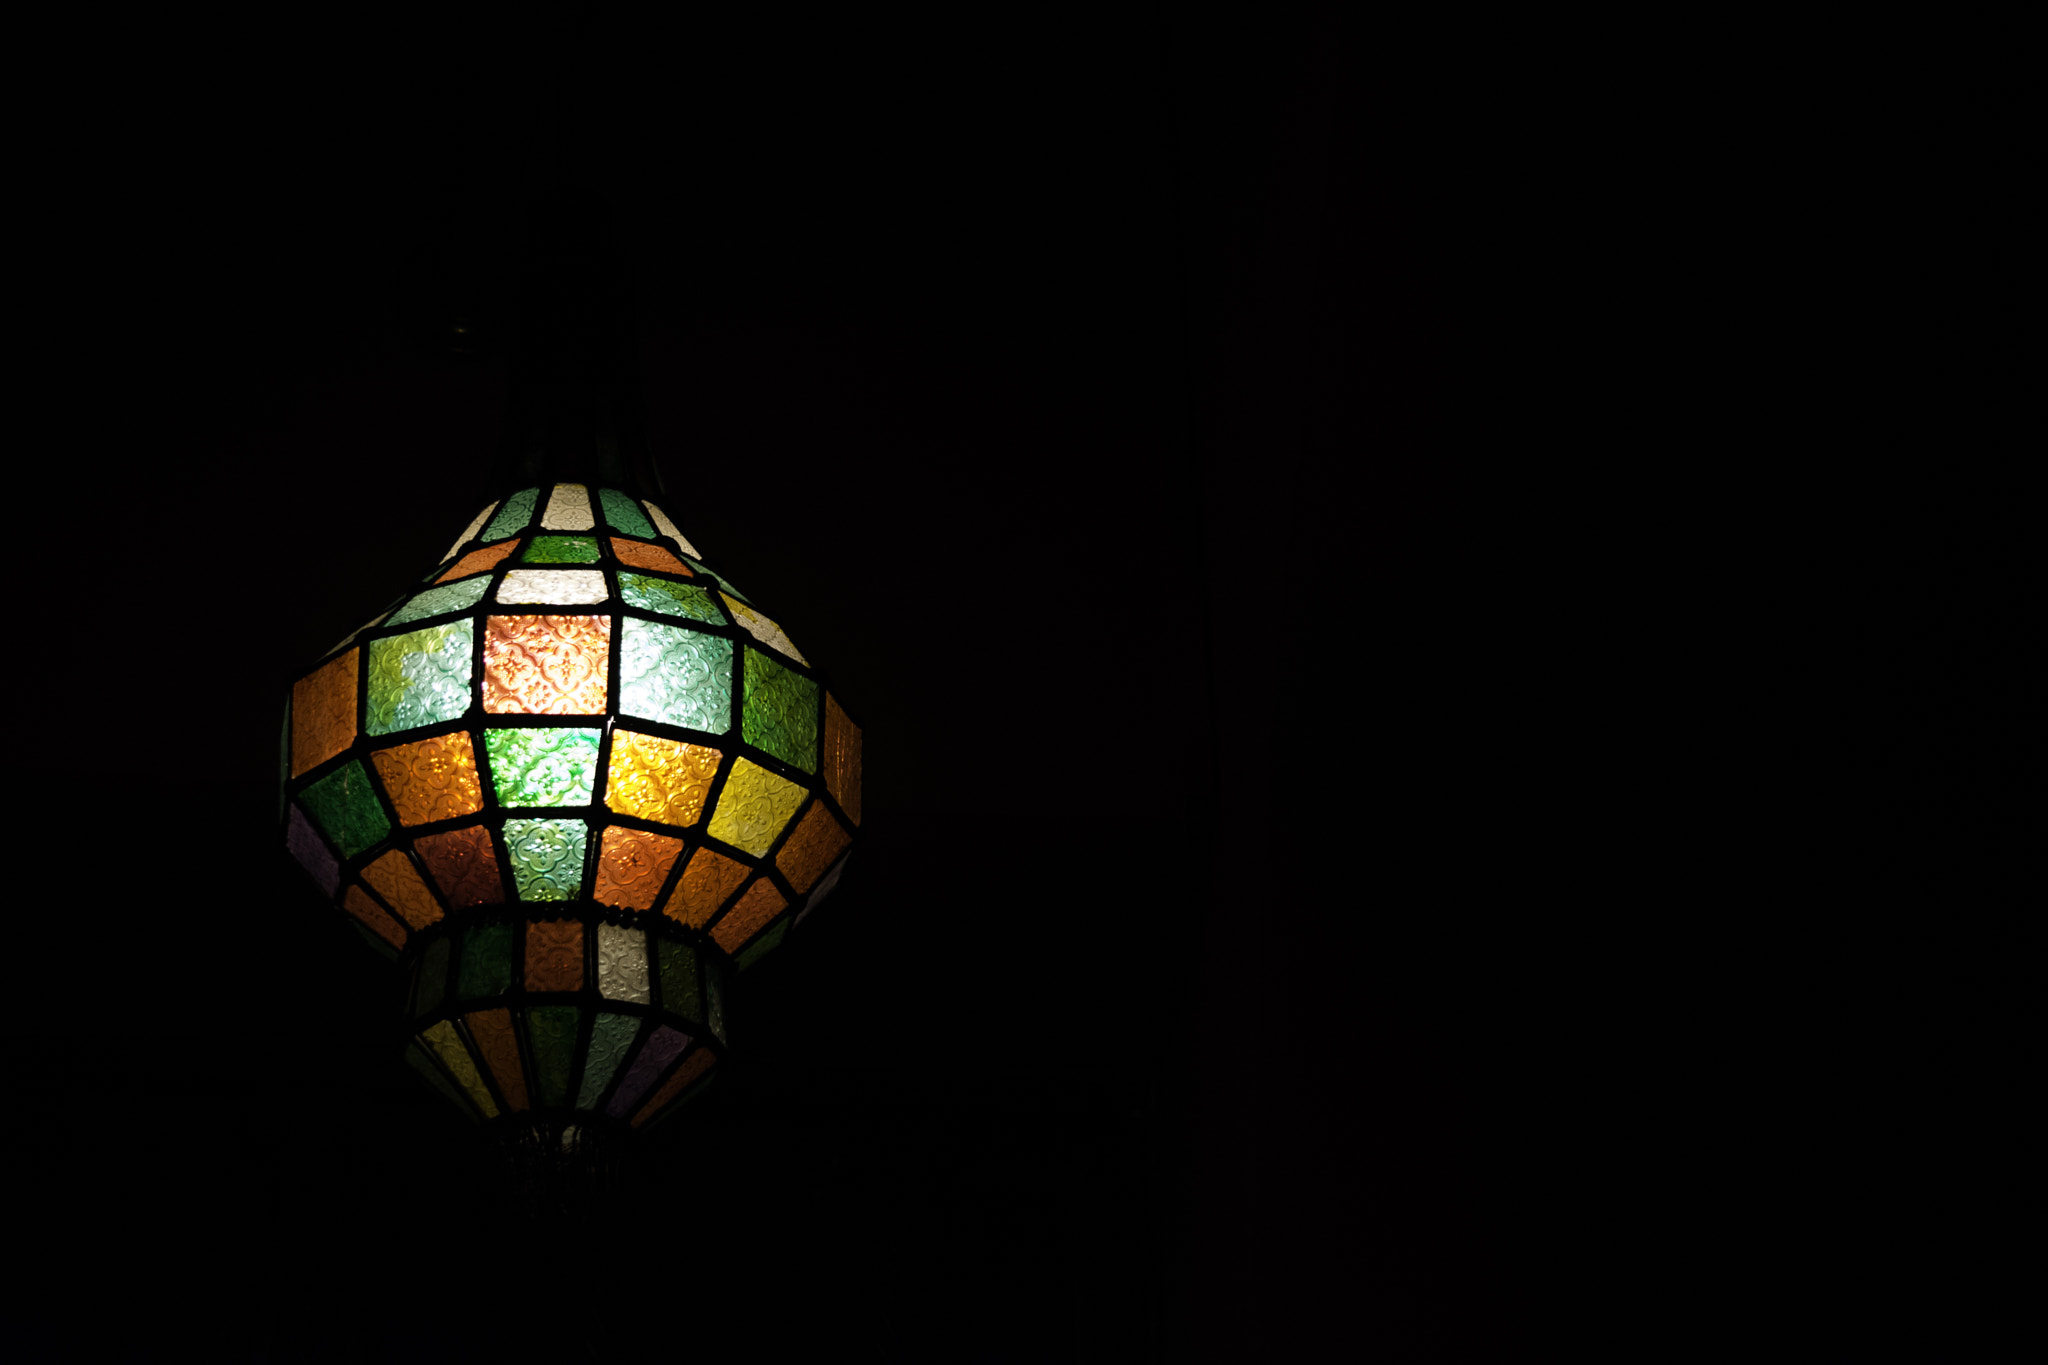 Nikon D5200 + AF-S DX Nikkor 18-55mm f/3.5-5.6G VR II + 2.8x sample photo. Stained glass lamp photography